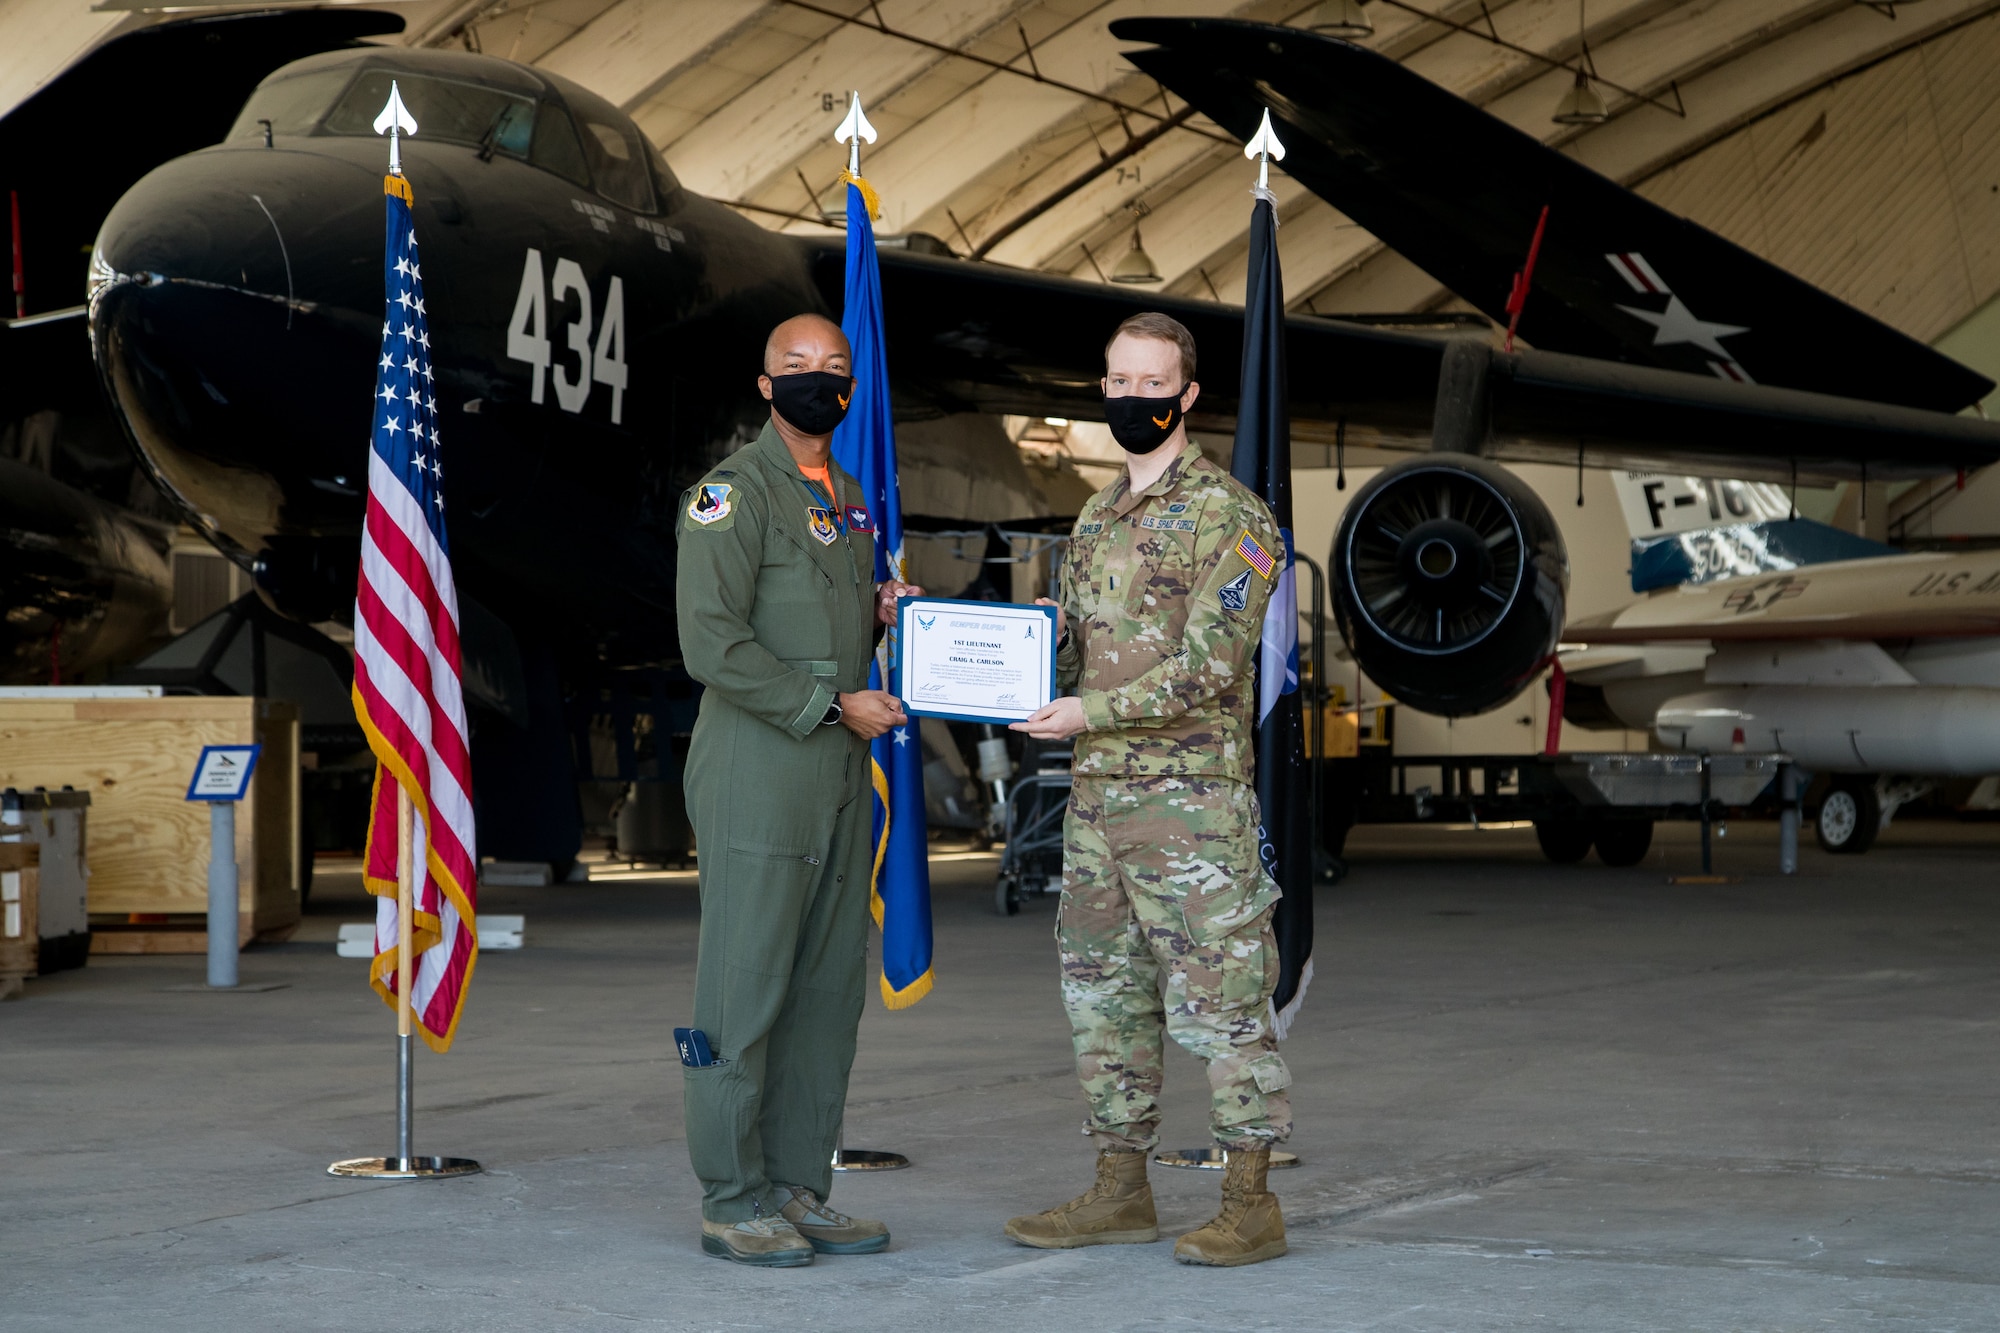 1st Lt. Craig Carlson, 412th Operations Group, originally of Boulder, Colorado, accepts his U.S. Space Force certificate from Col. Randel Gordon, 412th Test Wing Vice Commander during a Space Force Transfer Ceremony at Edwards Air Force Base, California, Feb. 11. (Air Force photo by Richard Gonzales)